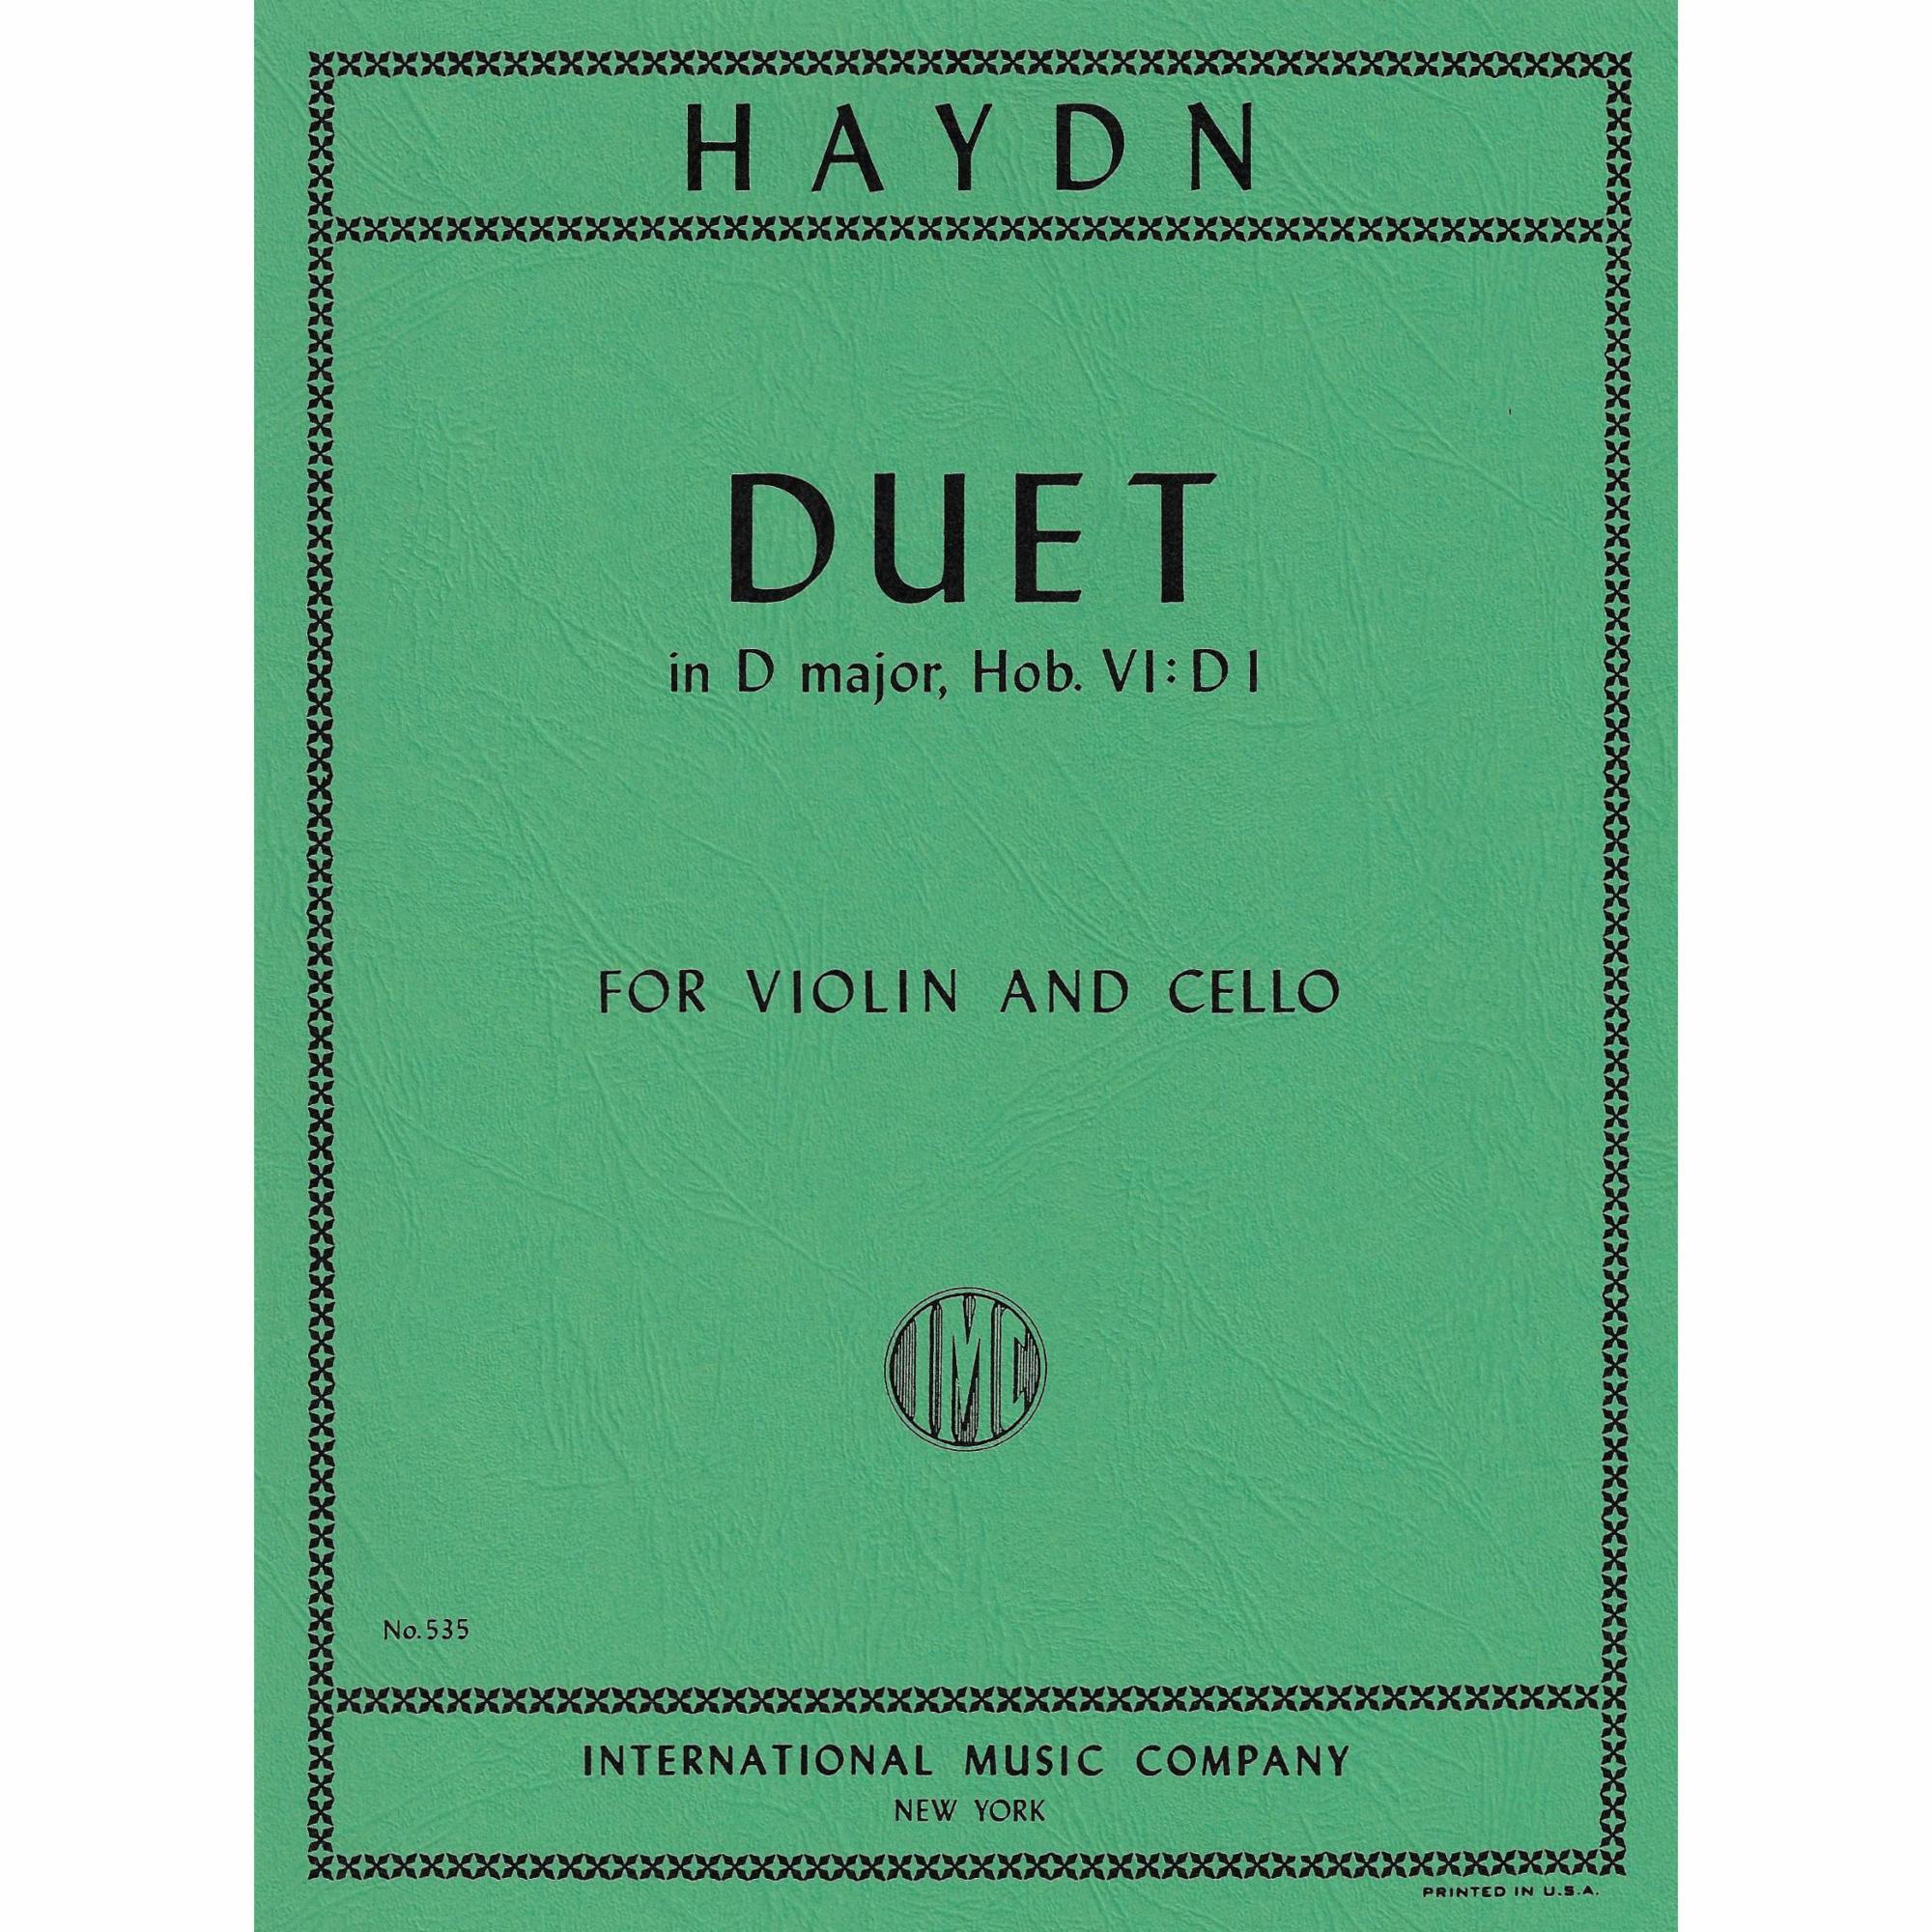 Haydn -- Duet in D Major, Hob. VI:D1 for Violin and Cello